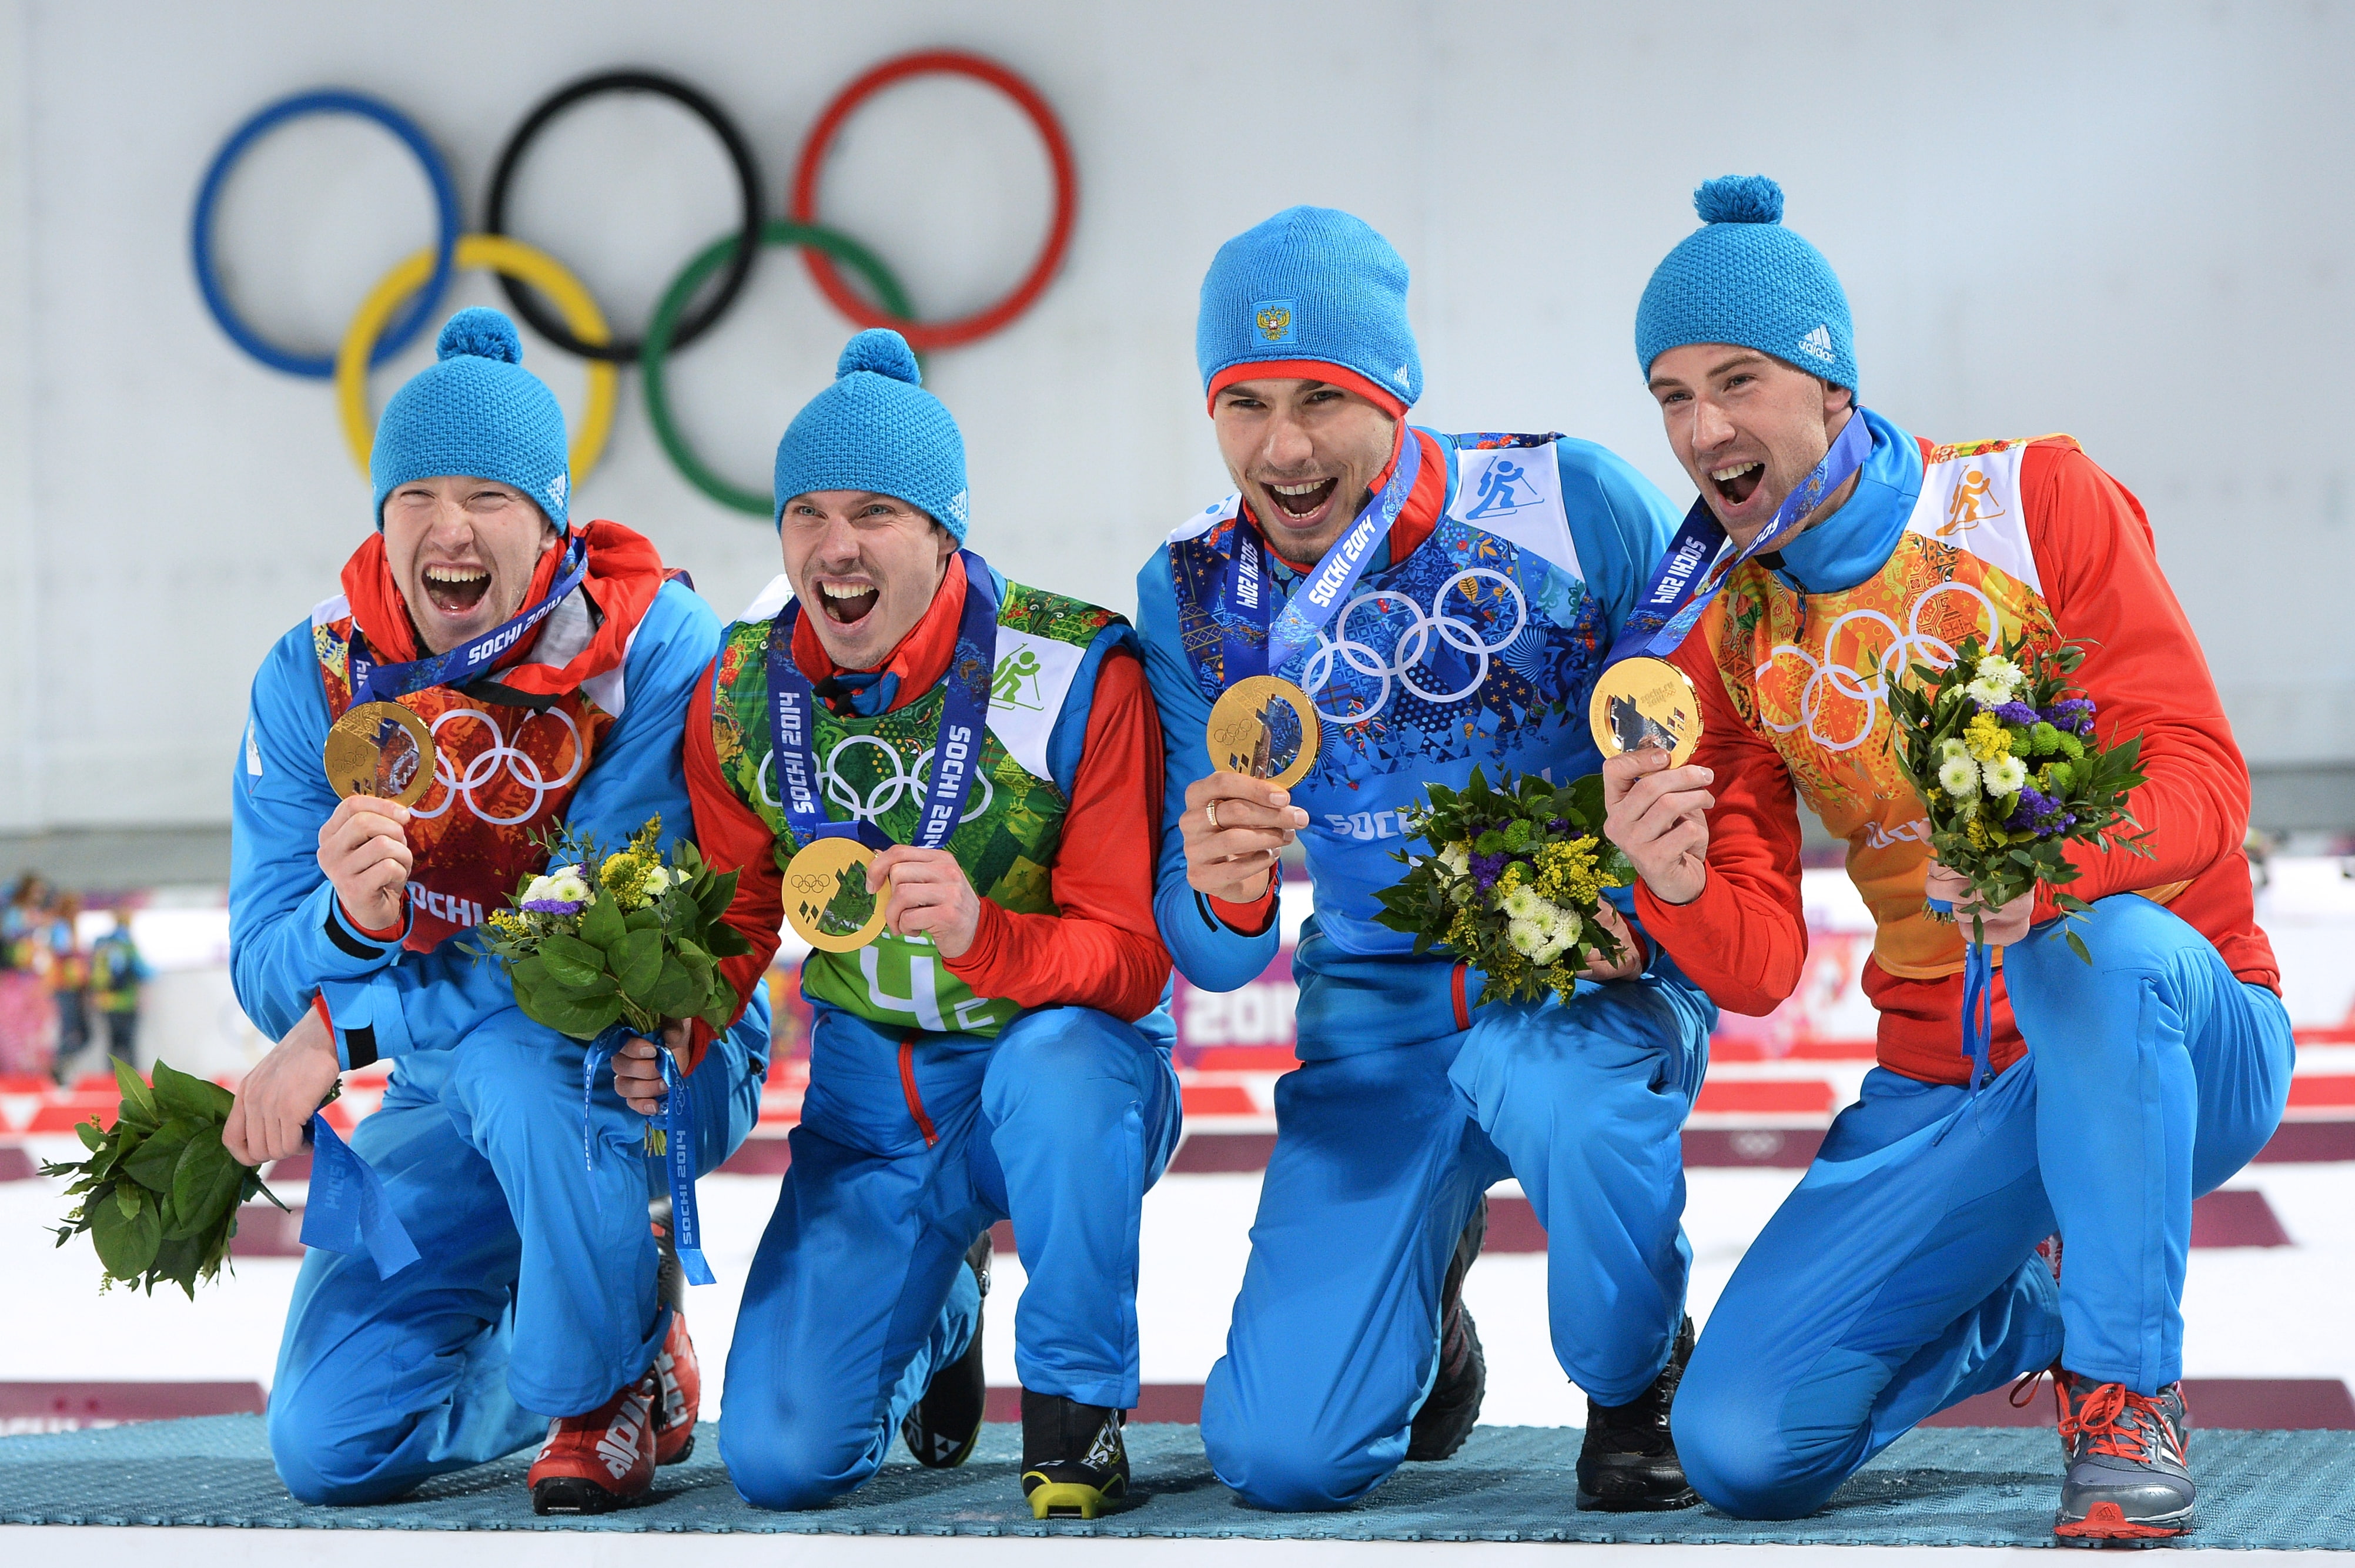 olympics gold medalists, Russia, Champions, Sochi 2014, The XXII Winter Olympic Games